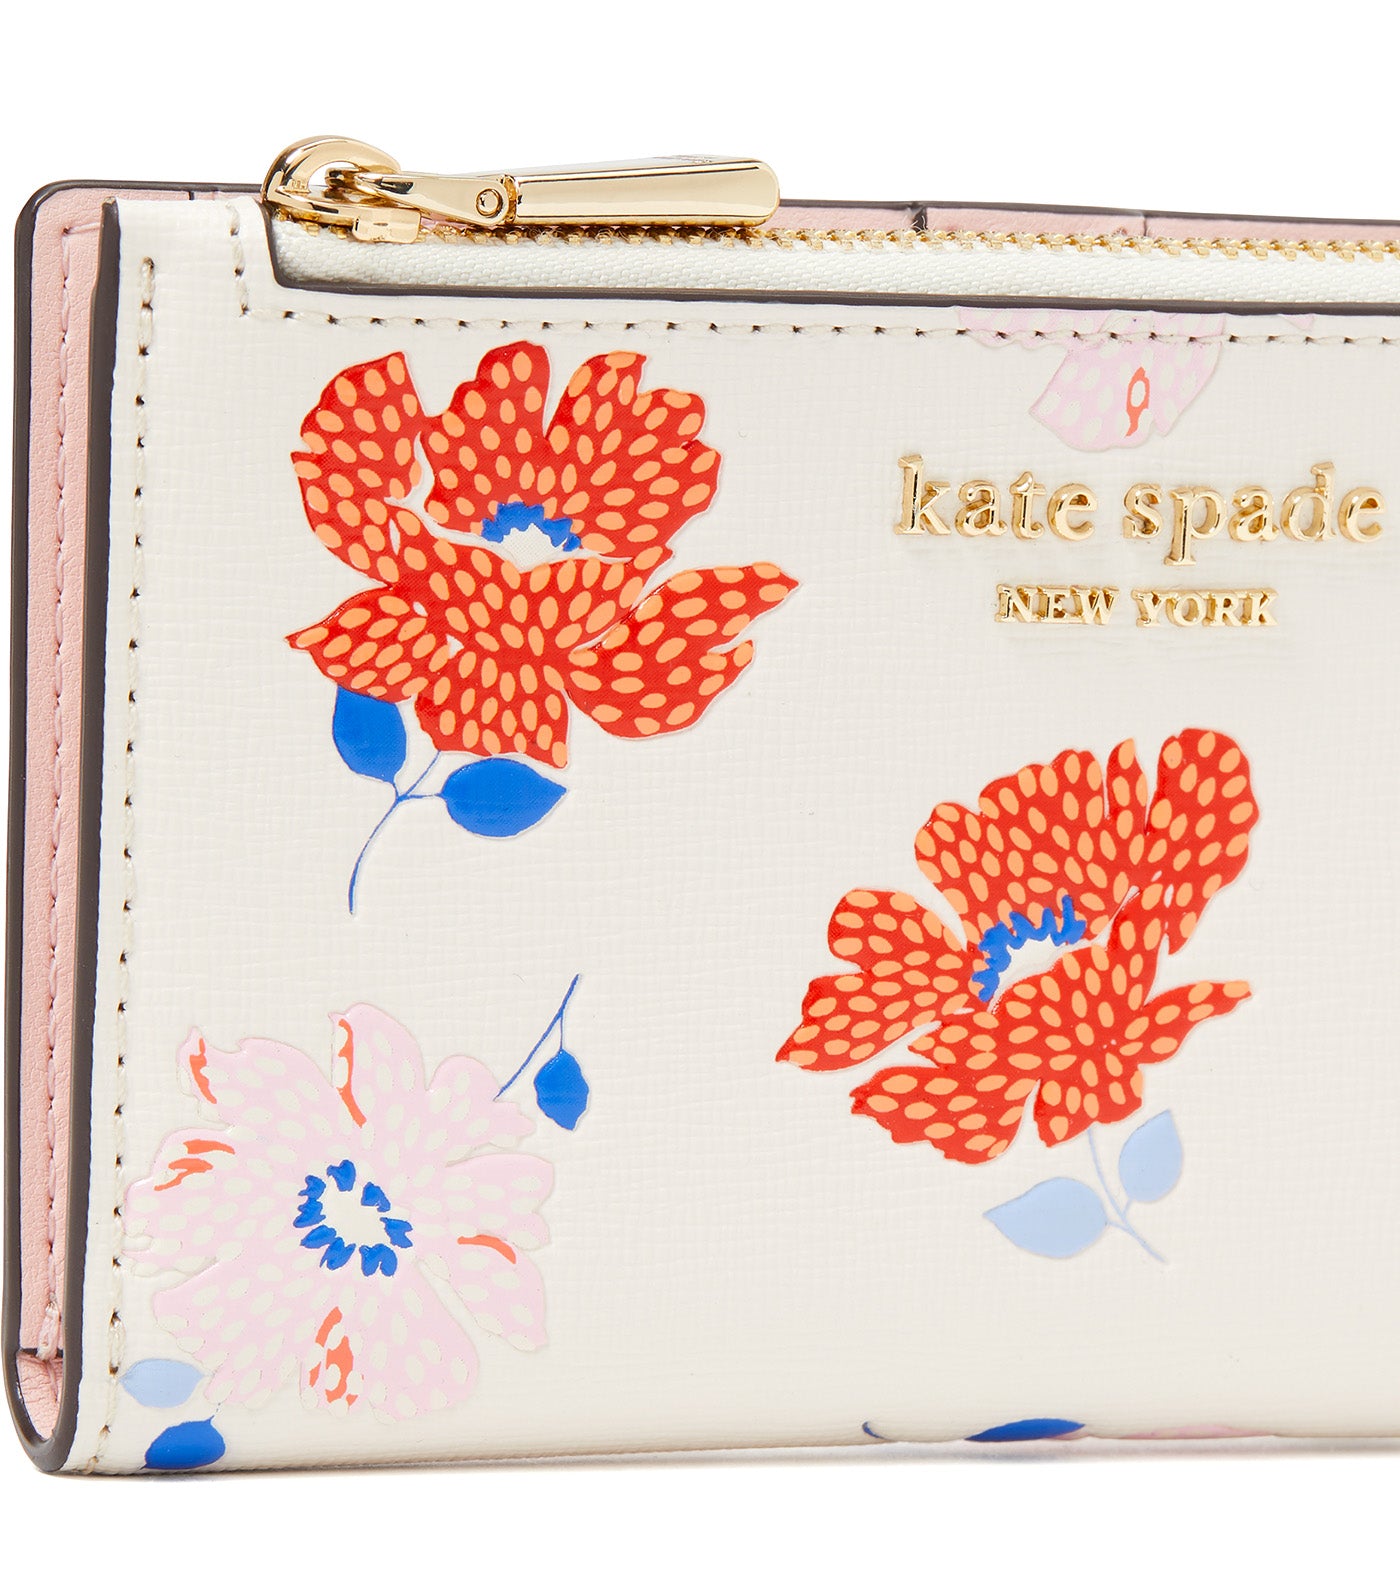 Morgan Dotty Floral Embossed Small Slim Bifold Wallet